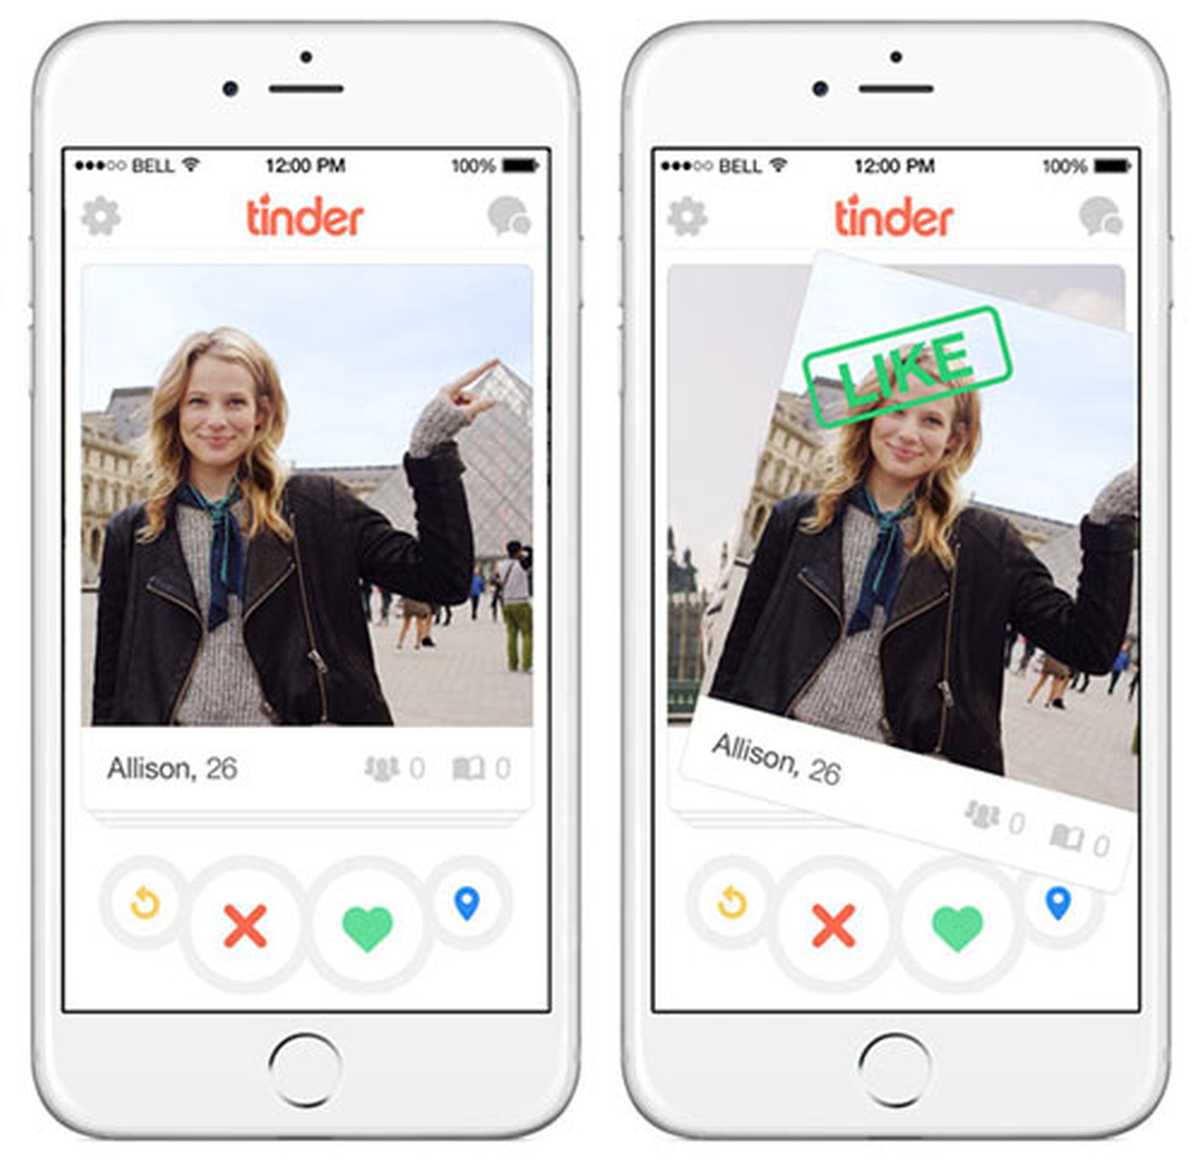 If you swipe right on Tinder, do they know?